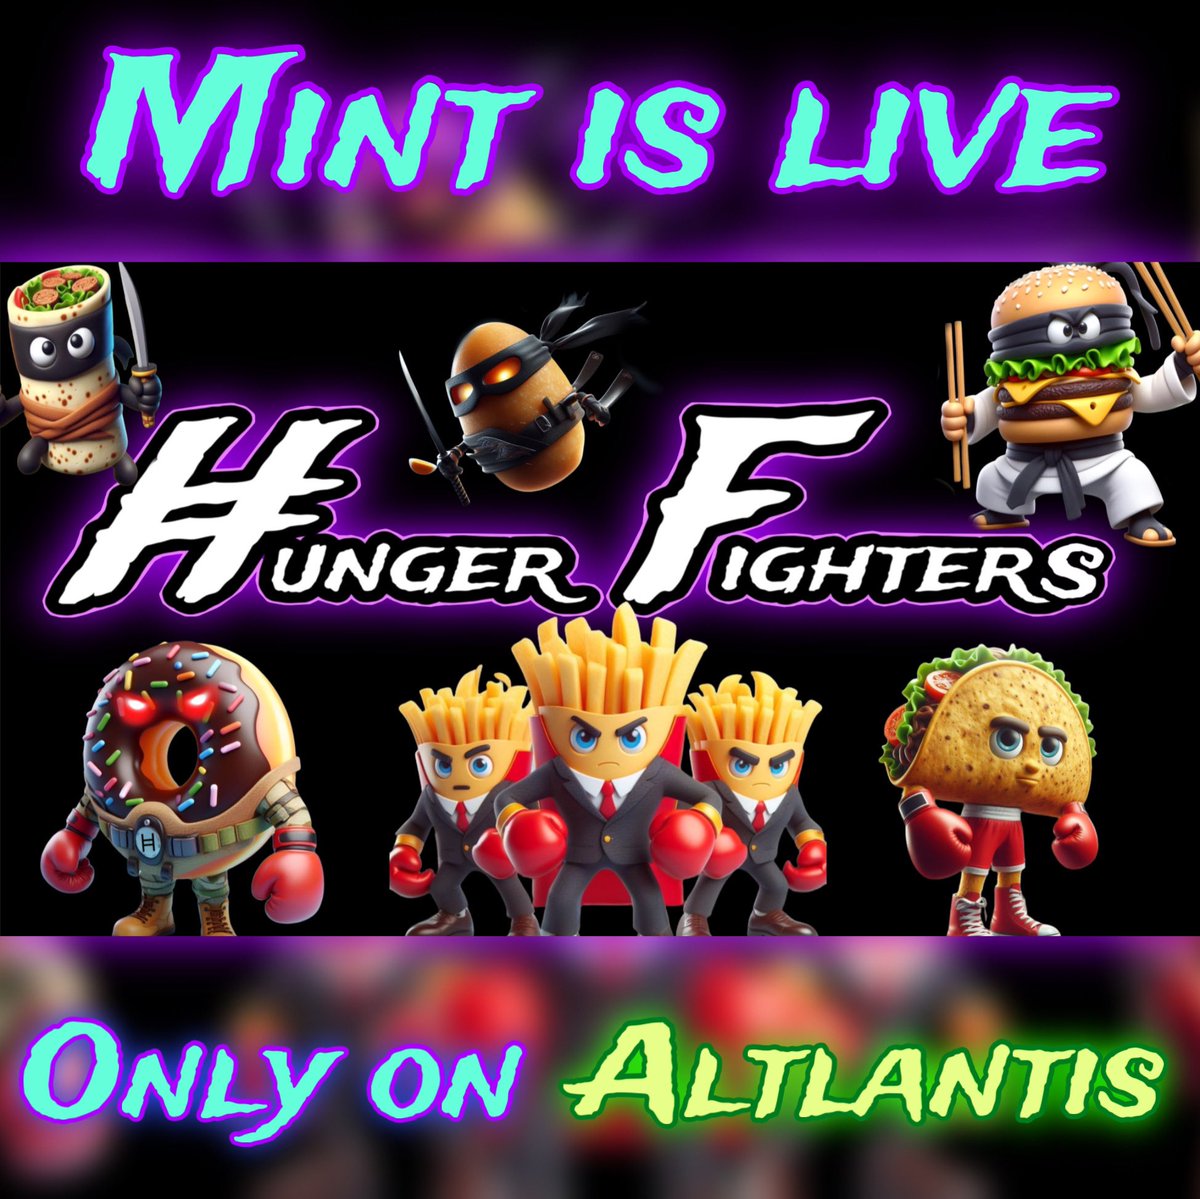 Go get your #HungerFighter right now while their hot!! Available on @AltlantisApp ➡️ altlantis.market/live/VmWsgpVym… All funds will be sent to the Donation Wallet to help IRL Hungry Communities! #HBAR #HBARbarians #HBARNFTs #NFTCollection #GoodPeopleDoingGood #FeedTheHungry